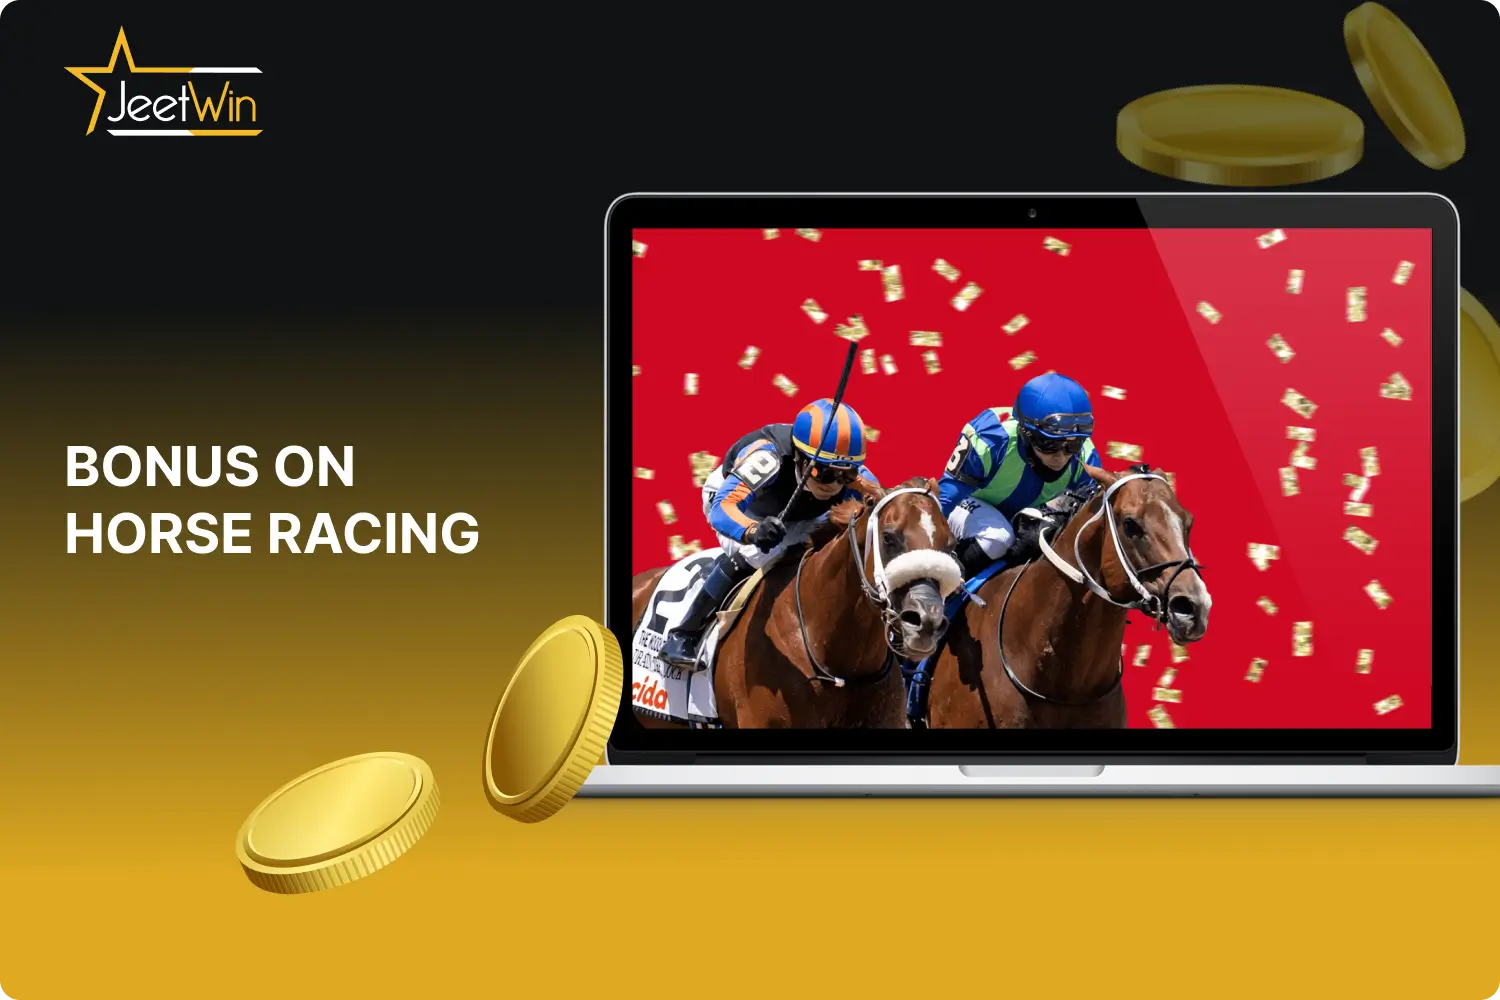 Indian horse racing bettors can get a welcome bonus from Jeetwin